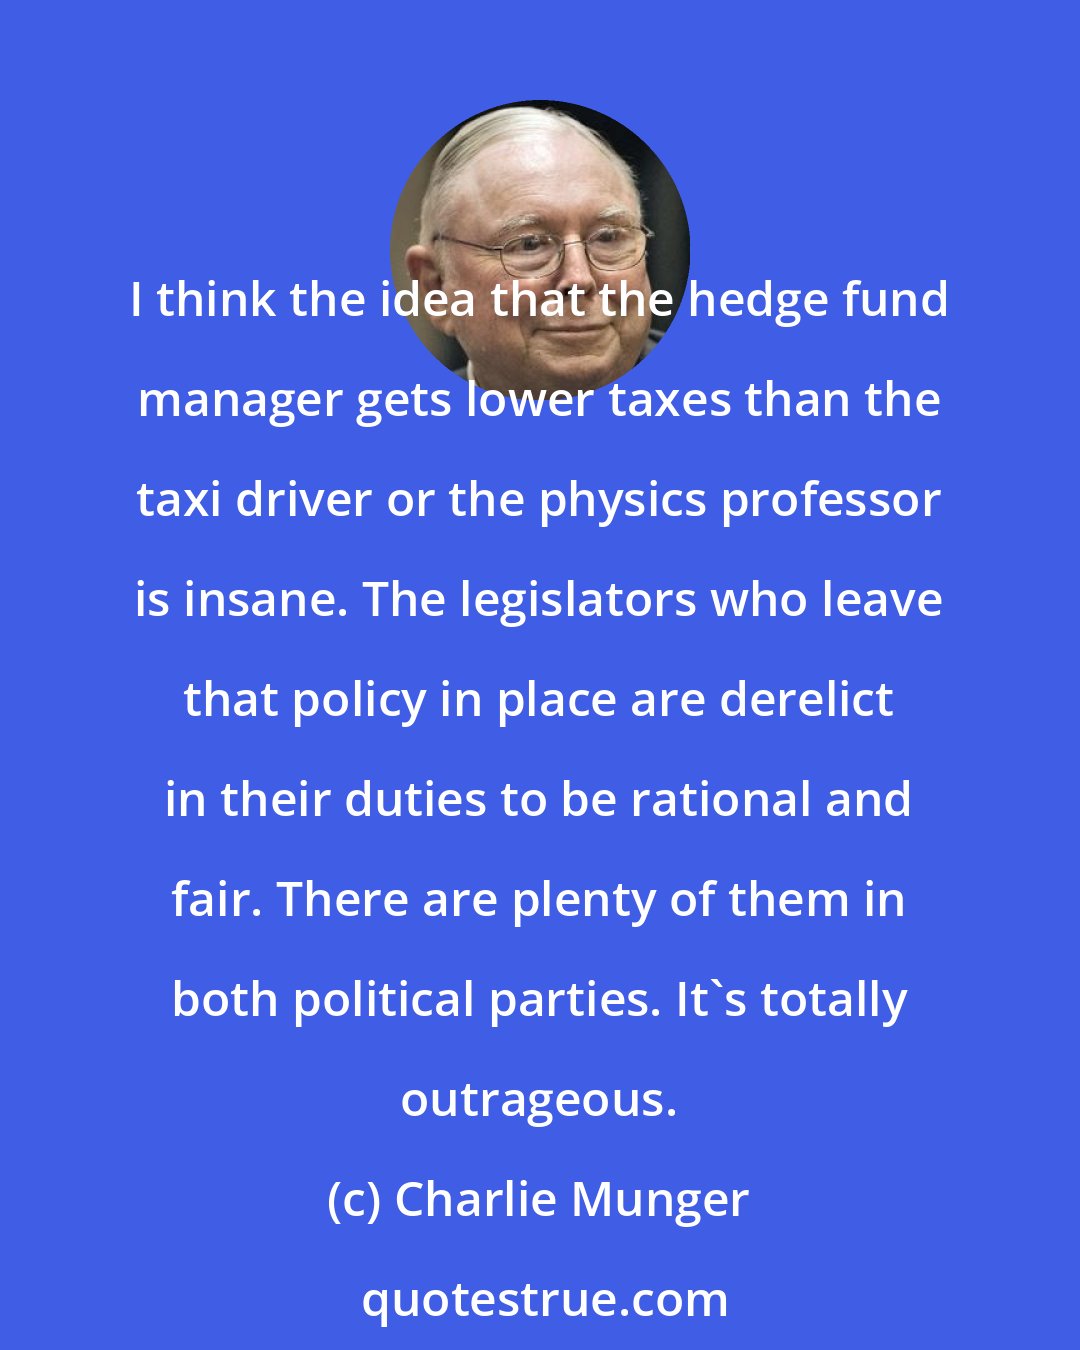 Charlie Munger: I think the idea that the hedge fund manager gets lower taxes than the taxi driver or the physics professor is insane. The legislators who leave that policy in place are derelict in their duties to be rational and fair. There are plenty of them in both political parties. It's totally outrageous.